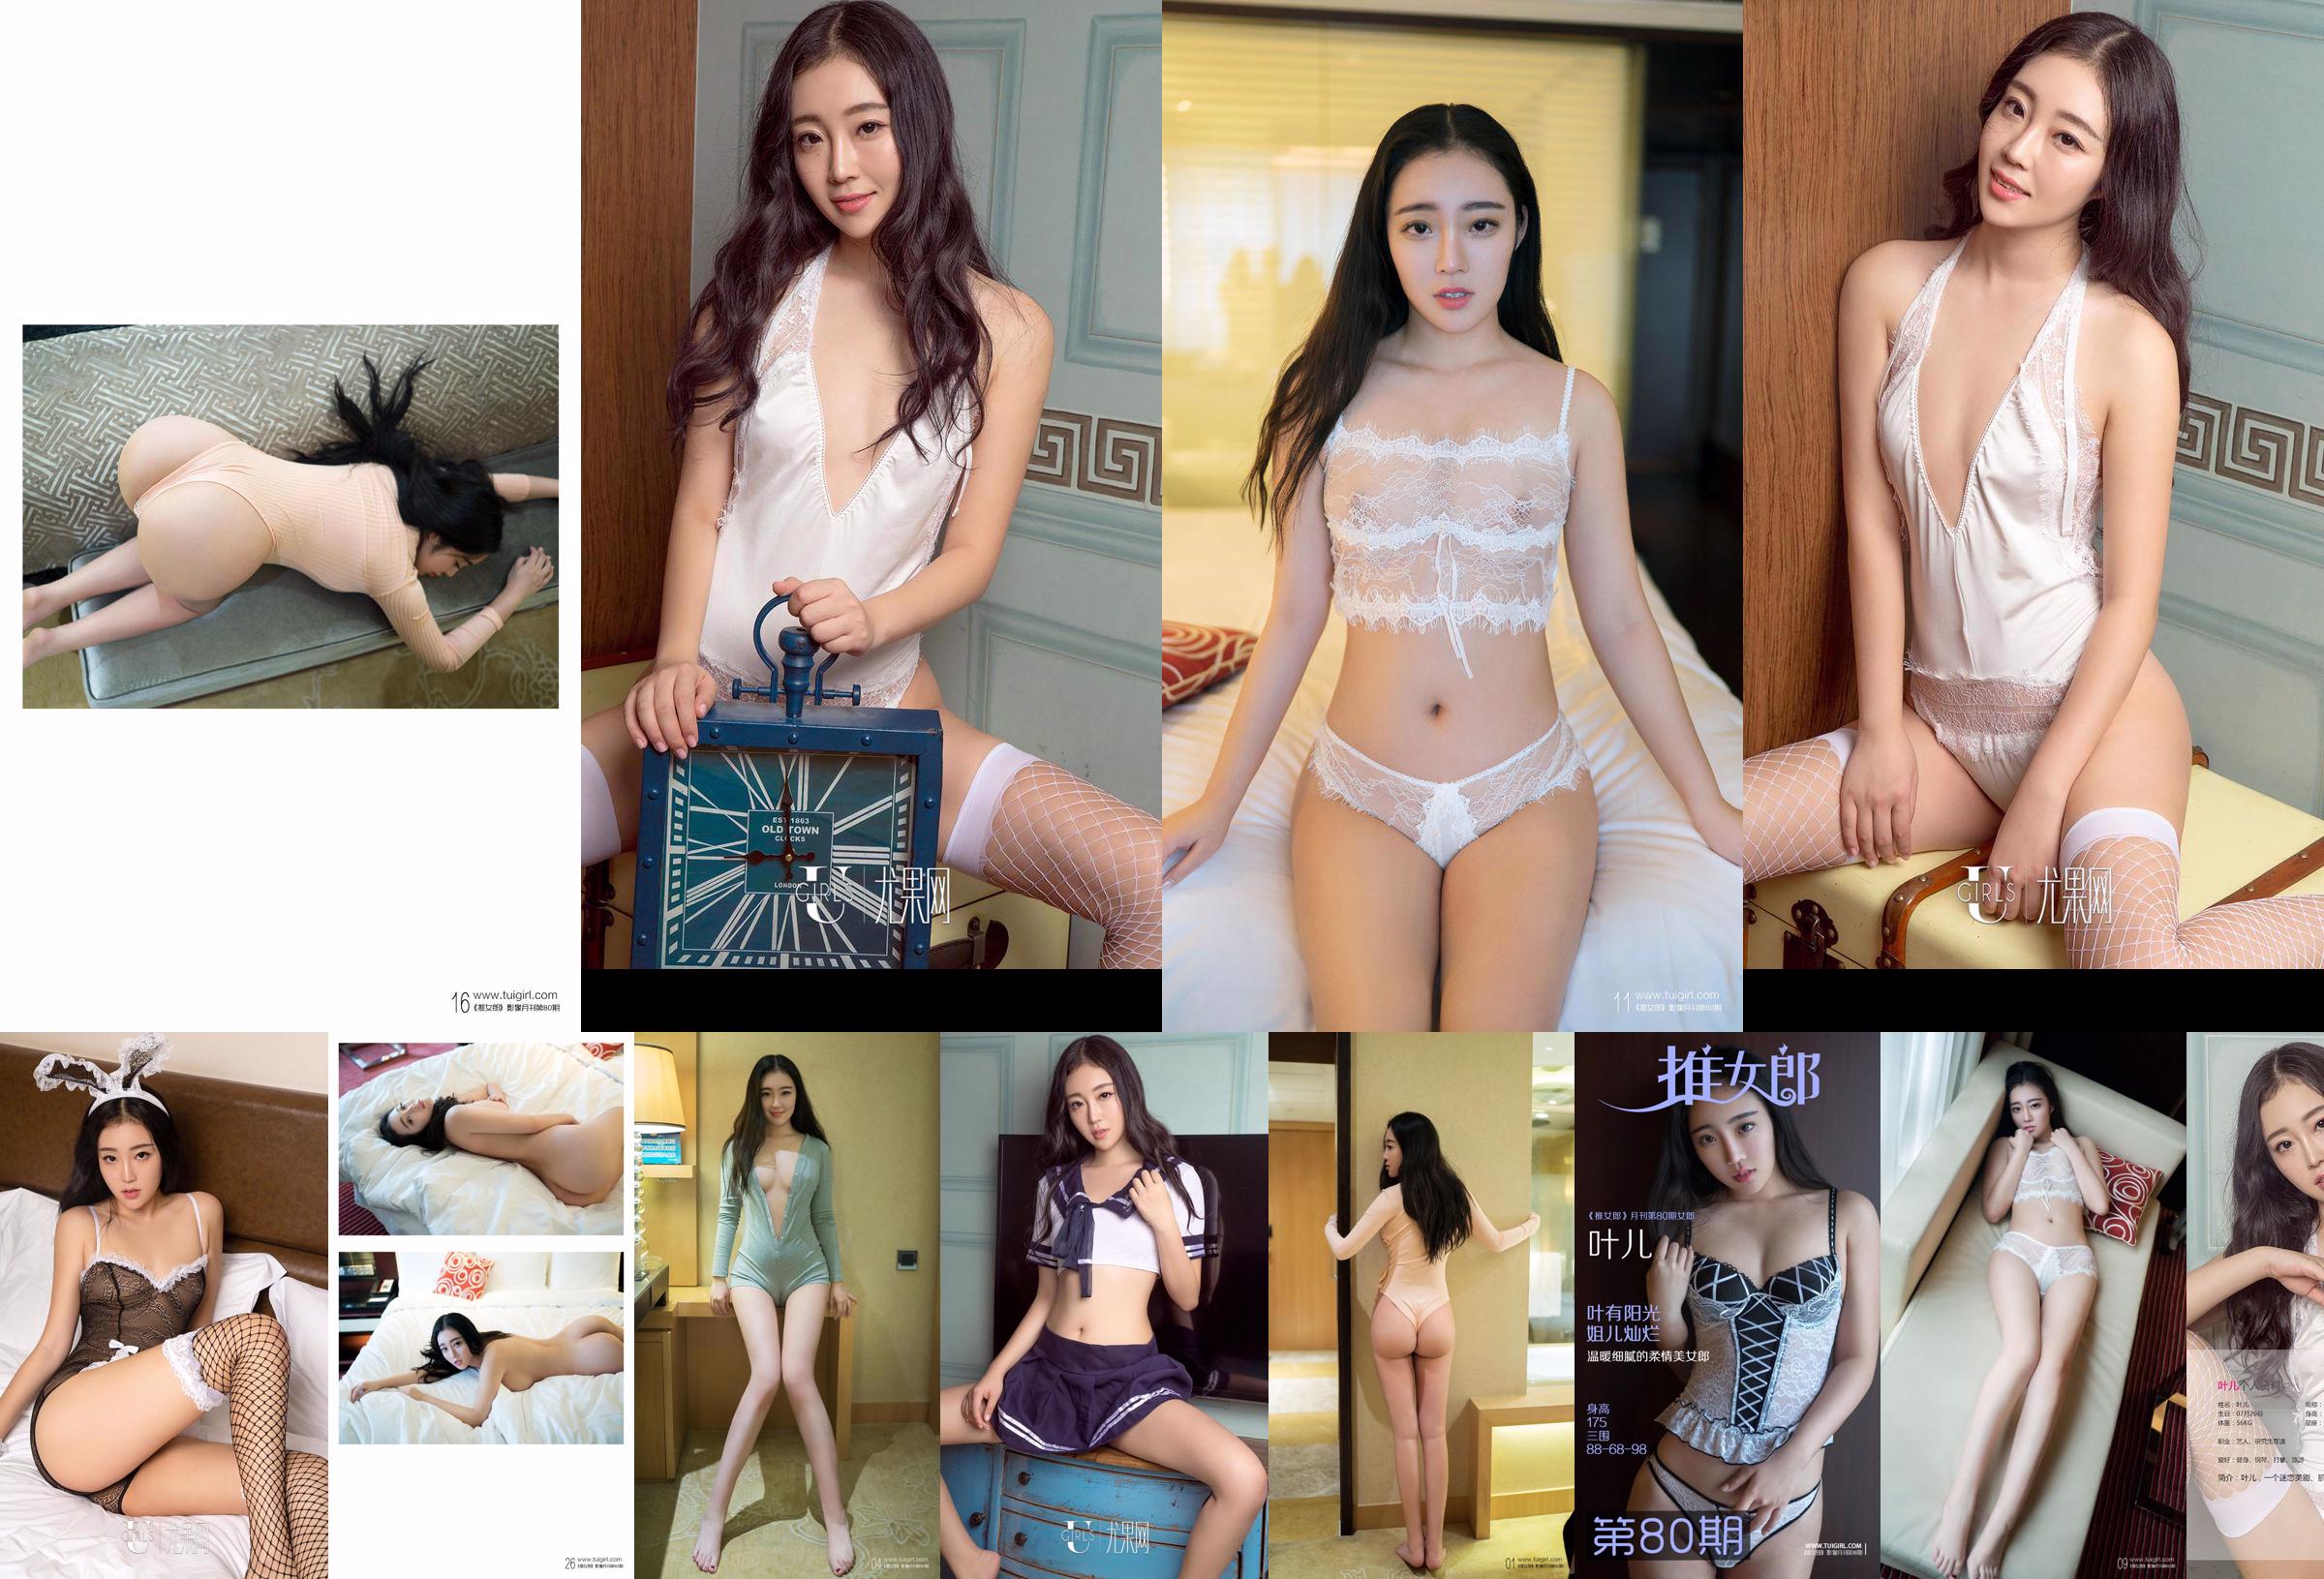 Ye Er "Time Beauty" [爱 优 物 Ugirls] No.459 No.2a52b6 Page 19